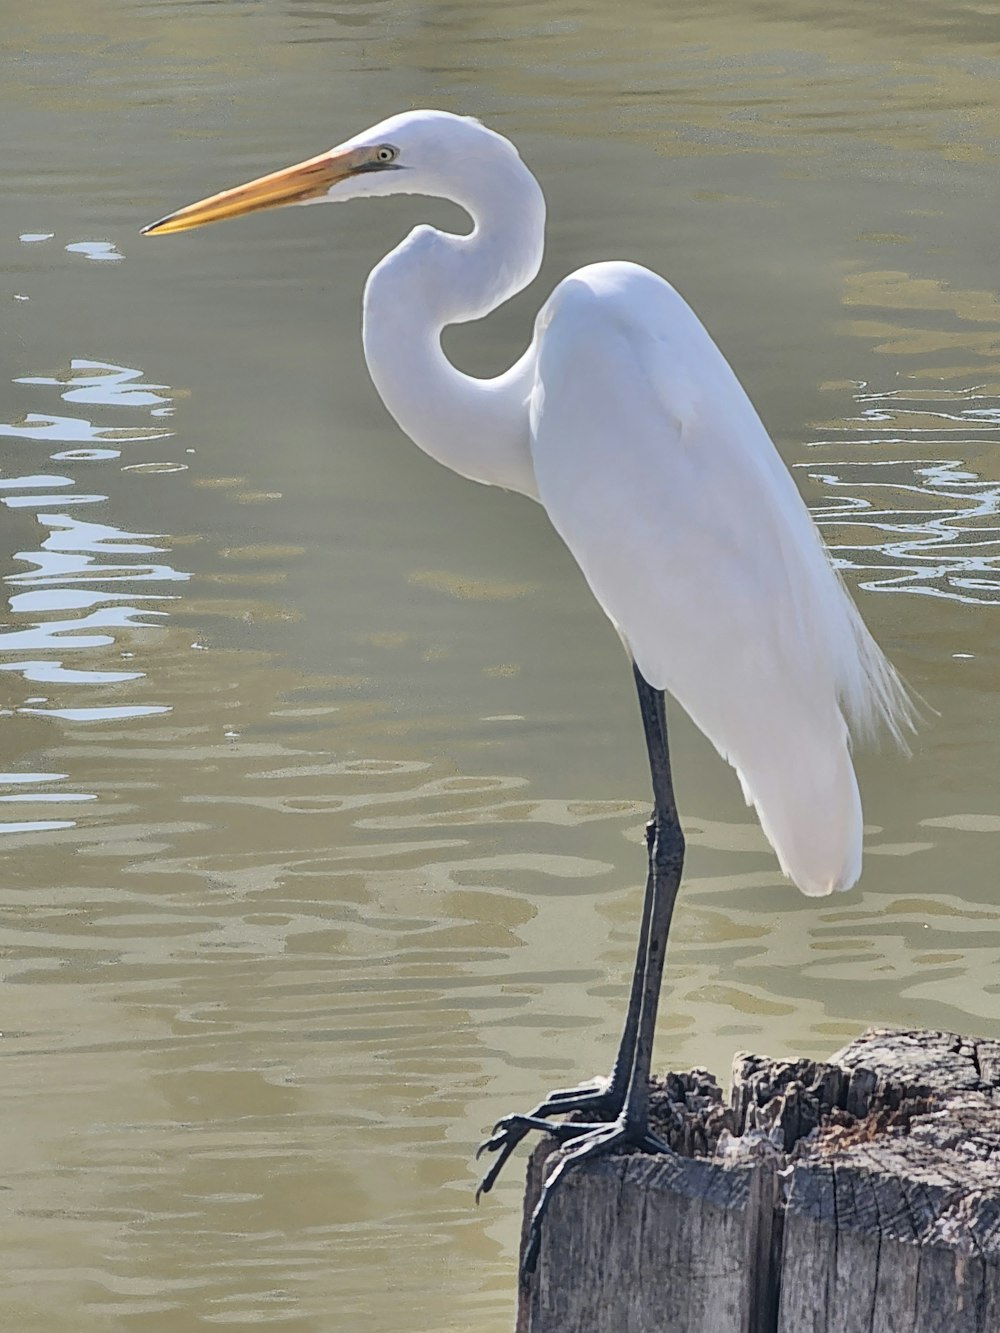 a white egret standing on a wooden post in the water